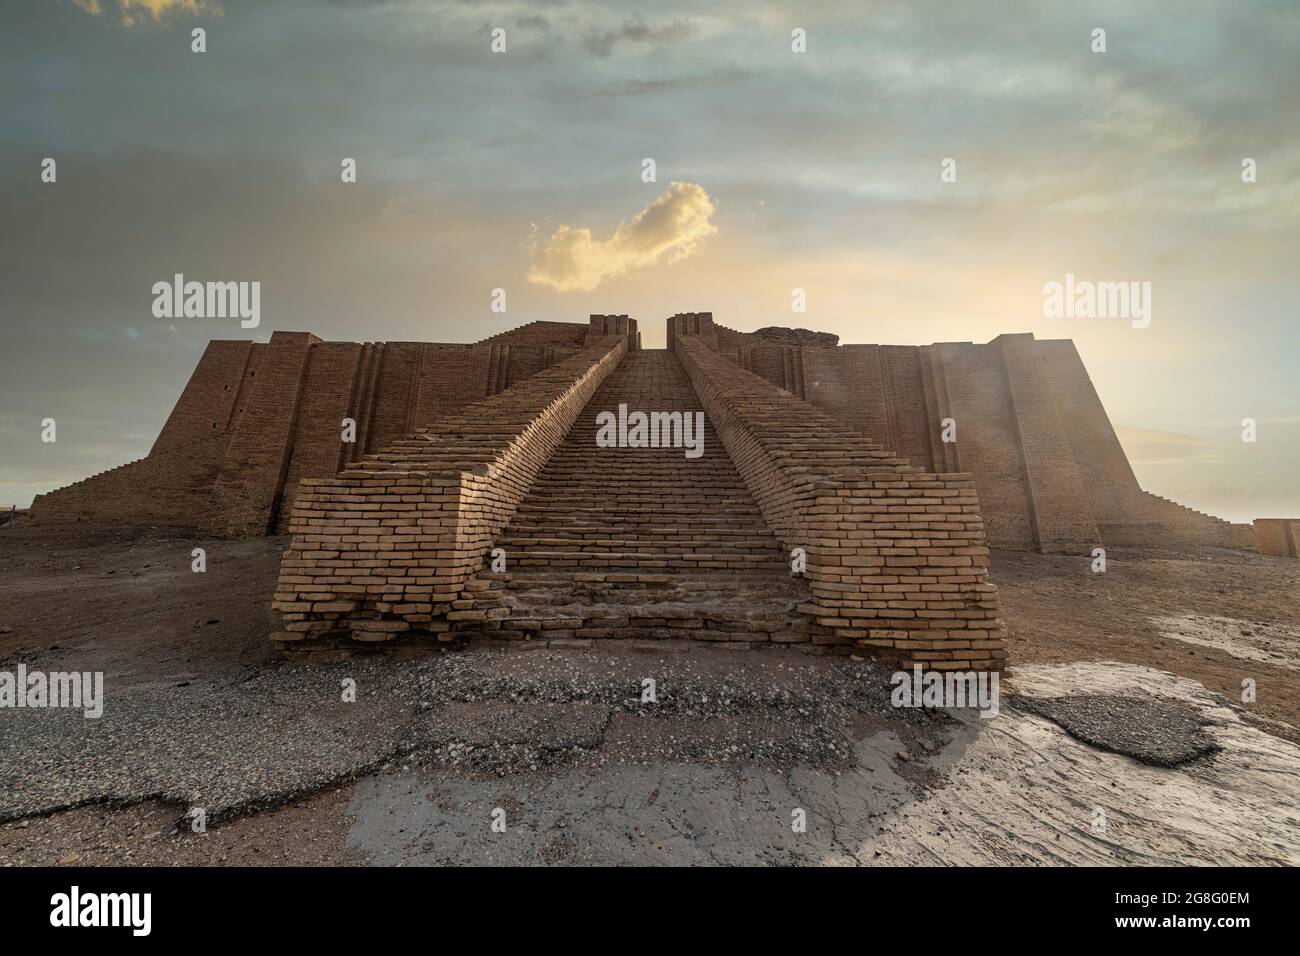 Ziggurat, ancient city of Ur, The Ahwar of Southern Iraq, UNESCO World Heritage Site, Iraq, Middle East Stock Photo